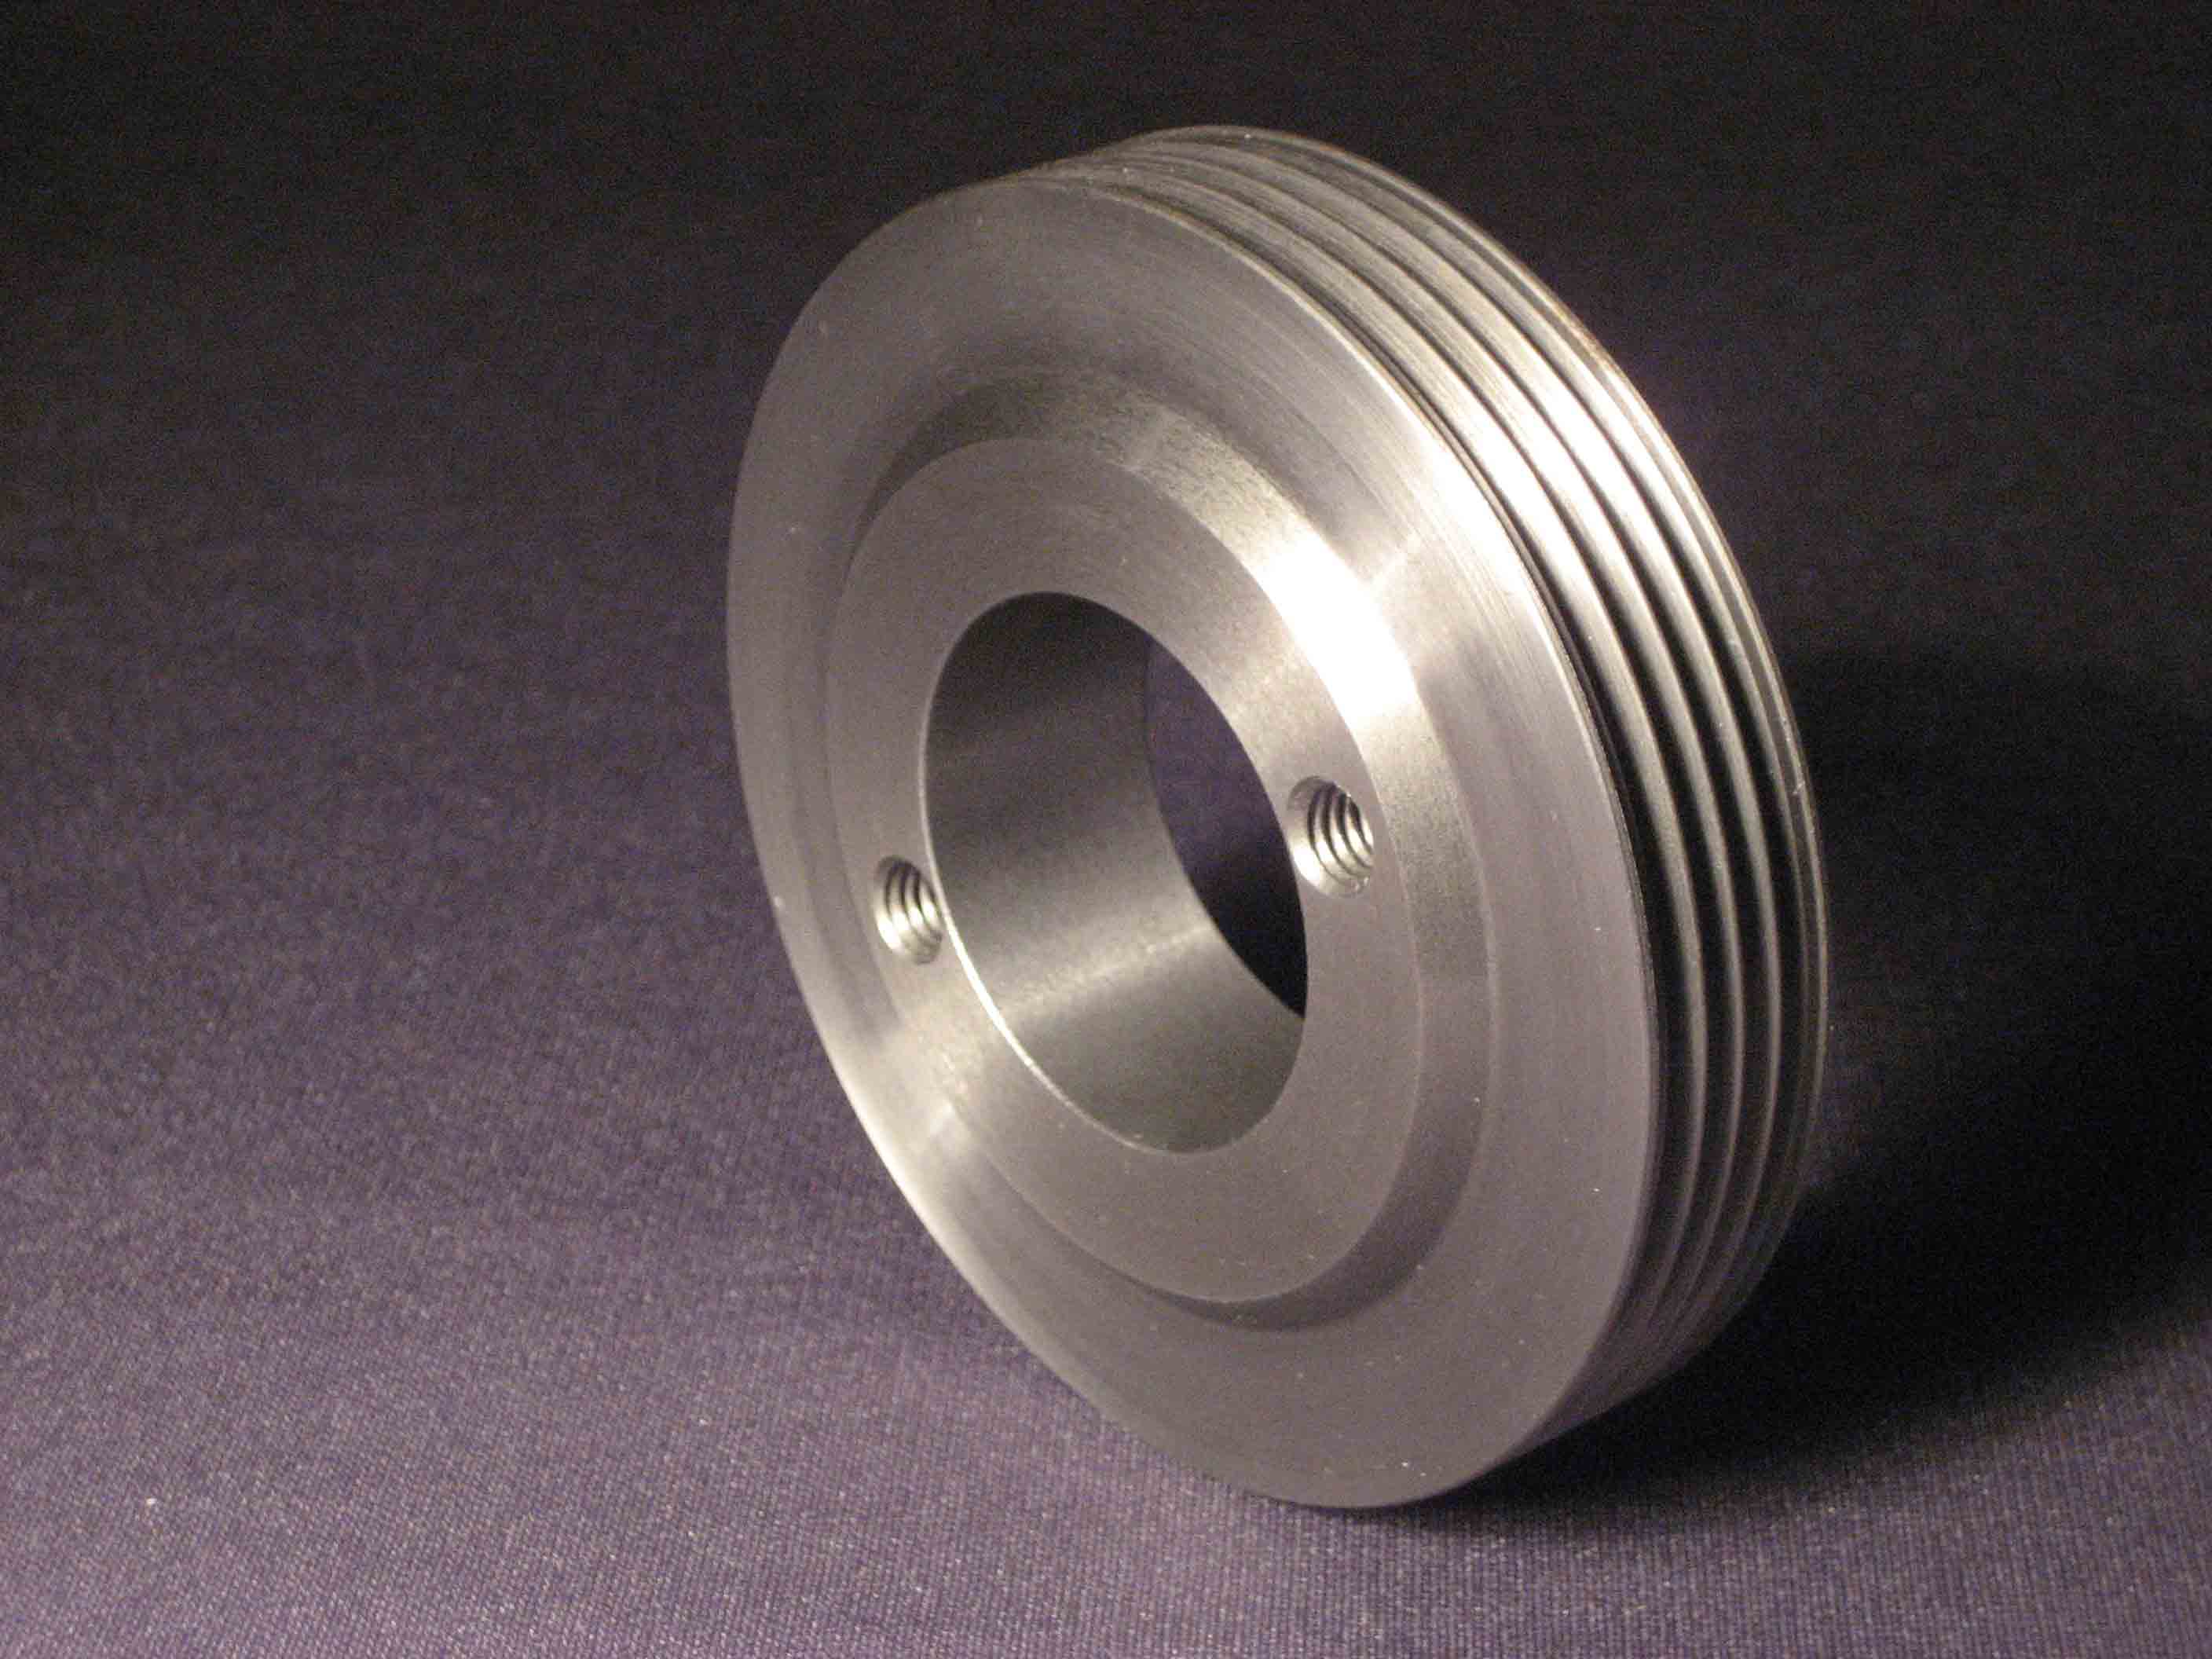 Metal Gears - Contact our job shop in Parkers Prairie, Minnesota, to take advantage of our machining services, which include turning and milling!